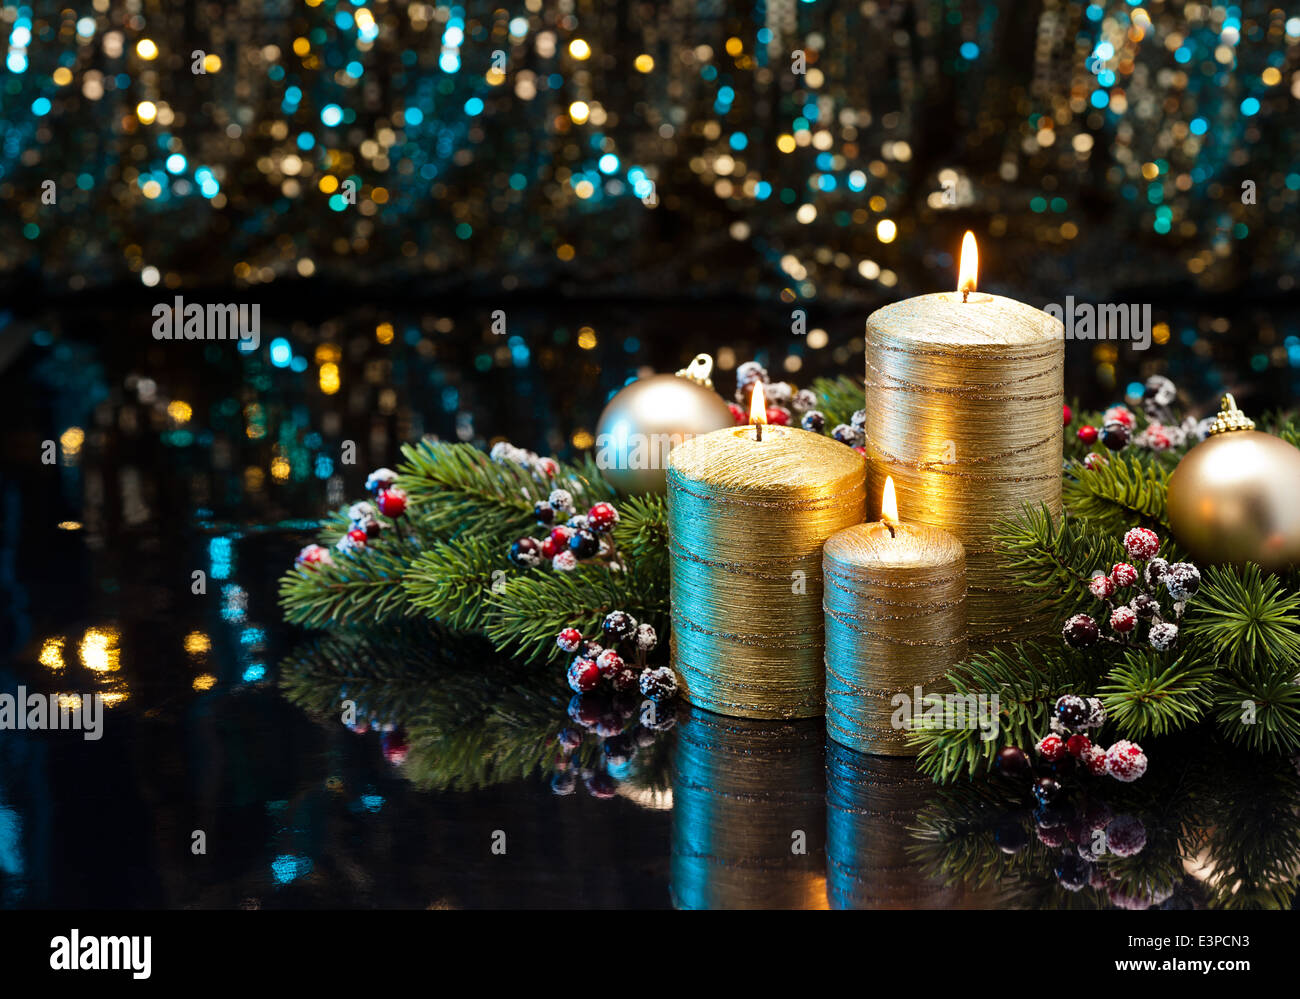 Three golden Candles with Christmas tree branches and baubles decorated Stock Photo